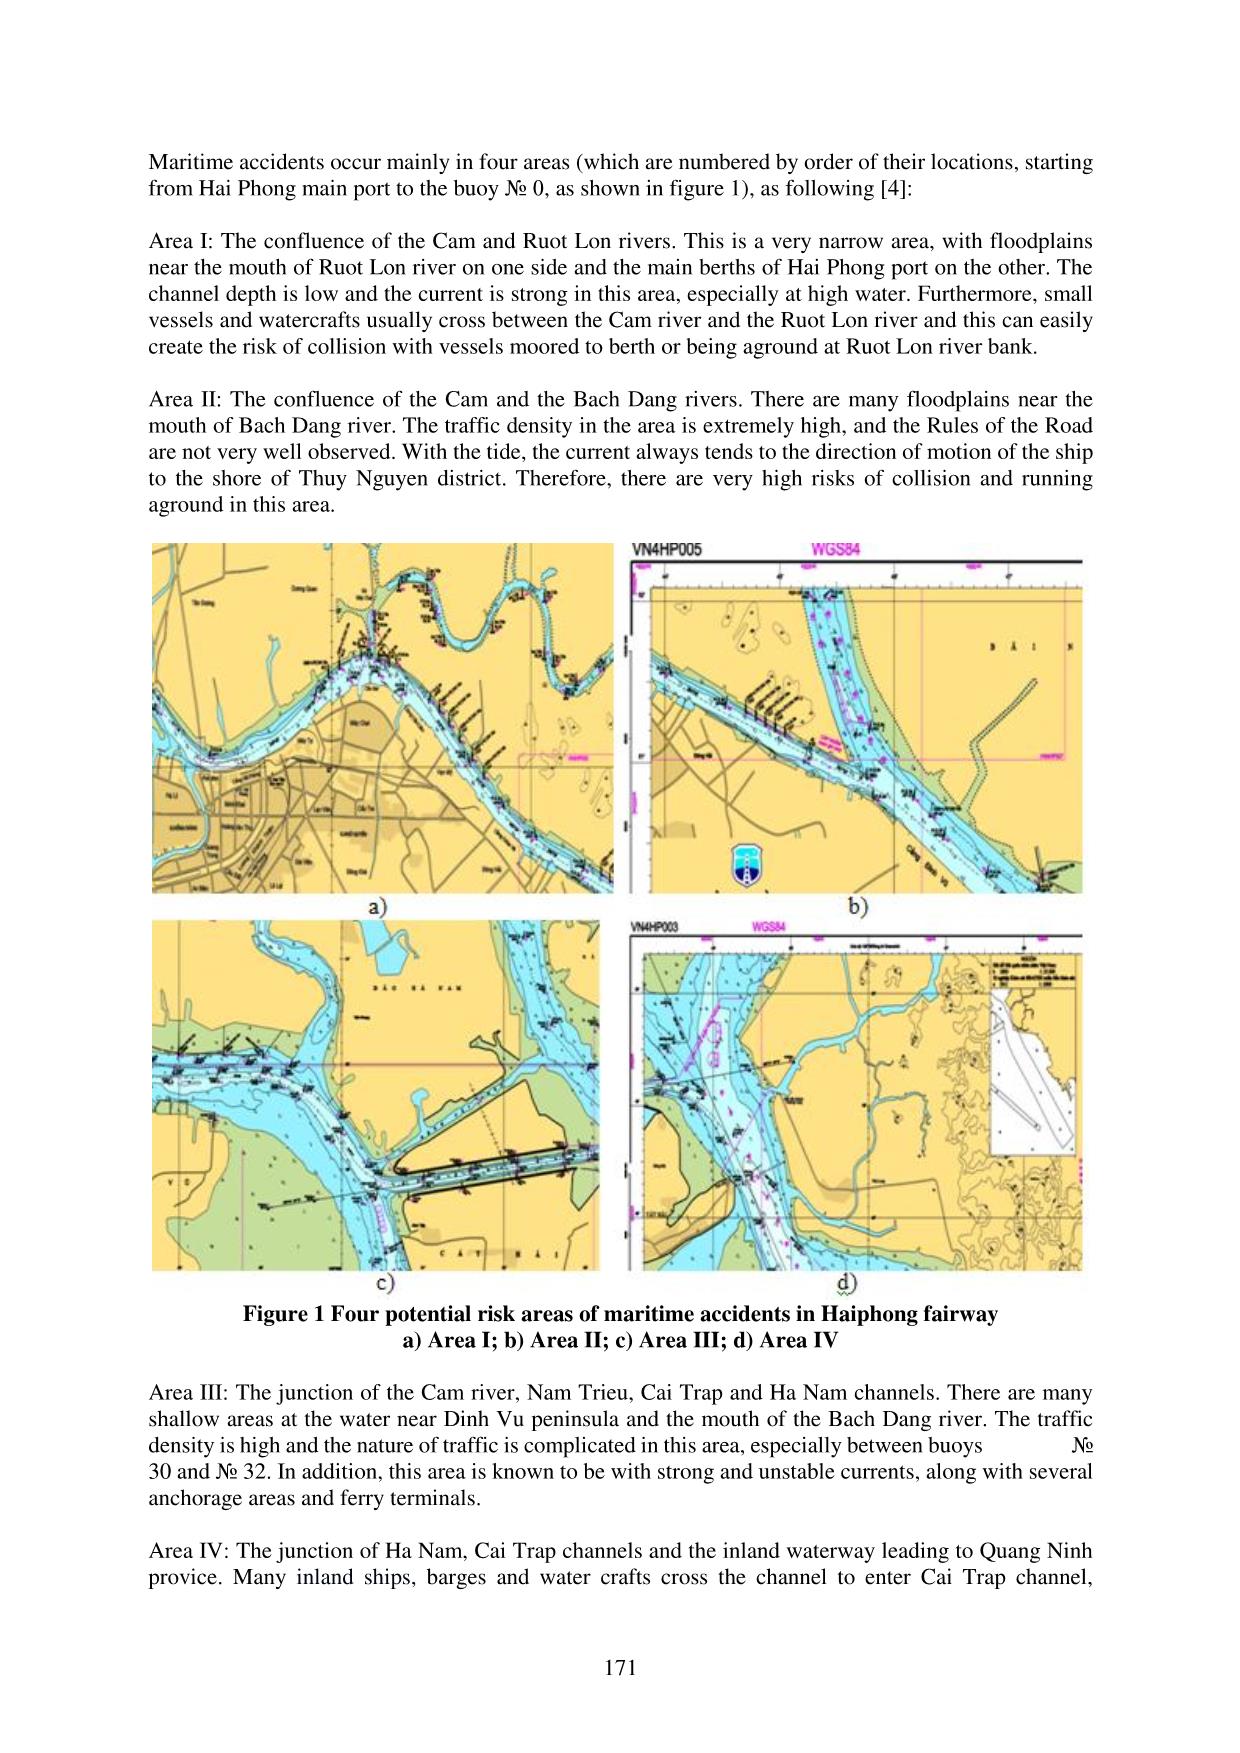 Calculation and simulation of the current effects on maritime safety in Haiphong fairway, Vietnam trang 2